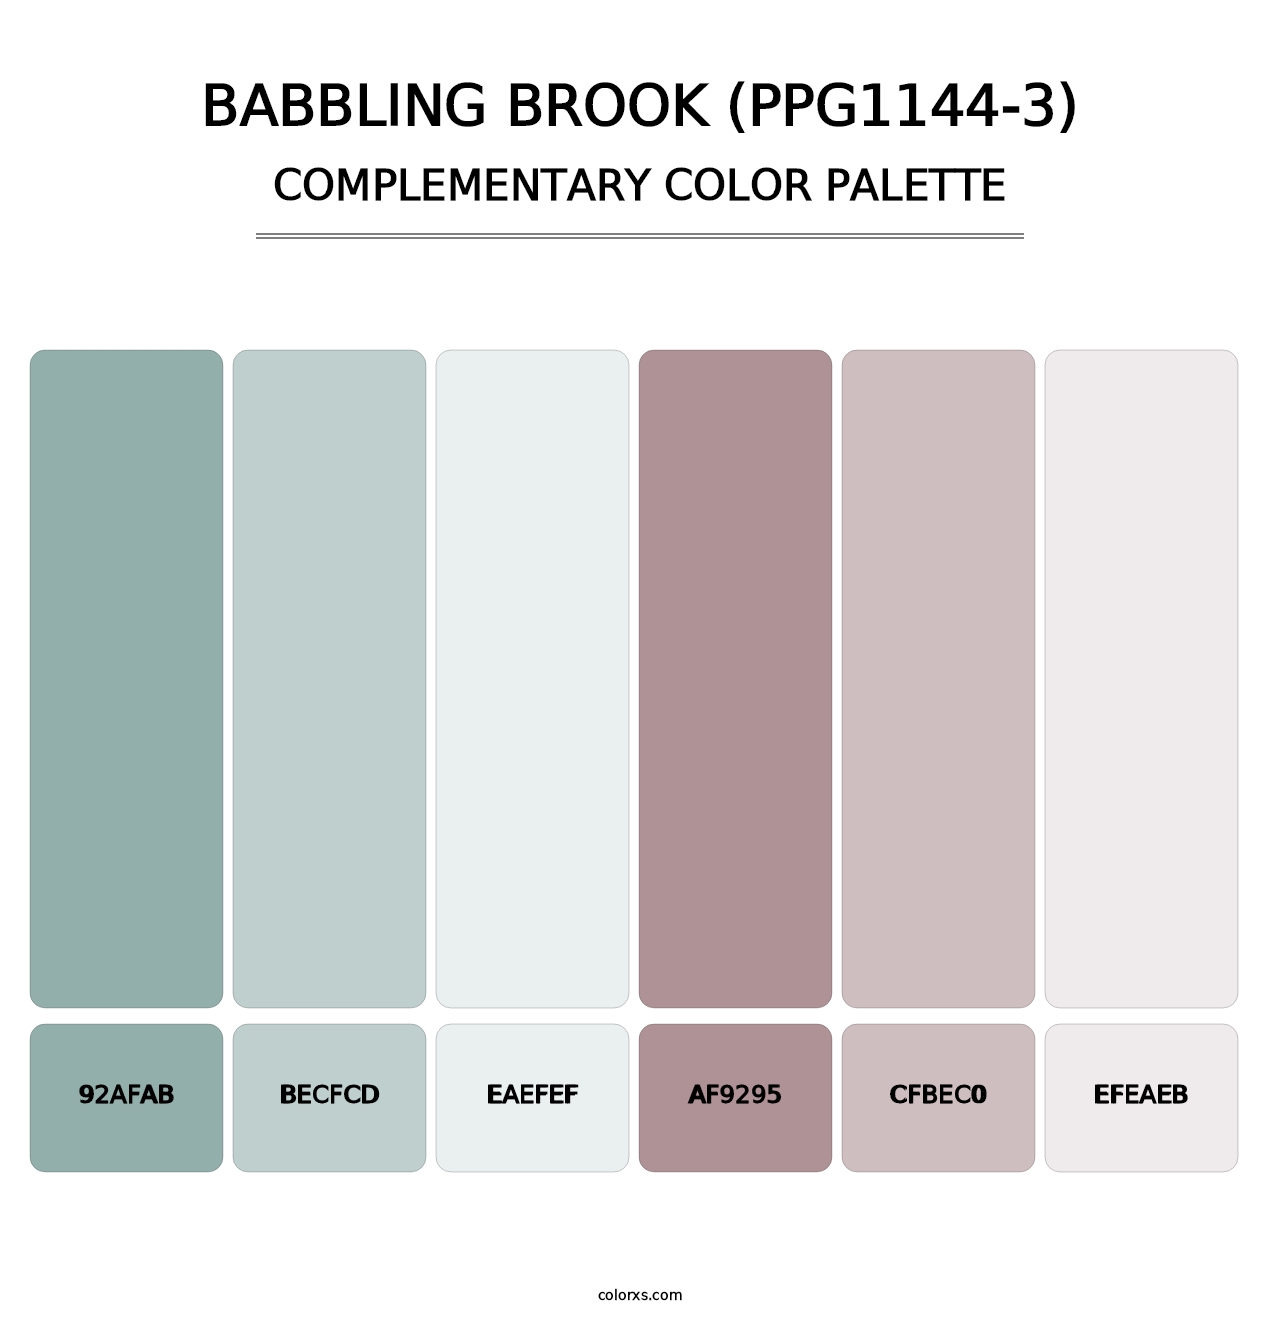 Babbling Brook (PPG1144-3) - Complementary Color Palette